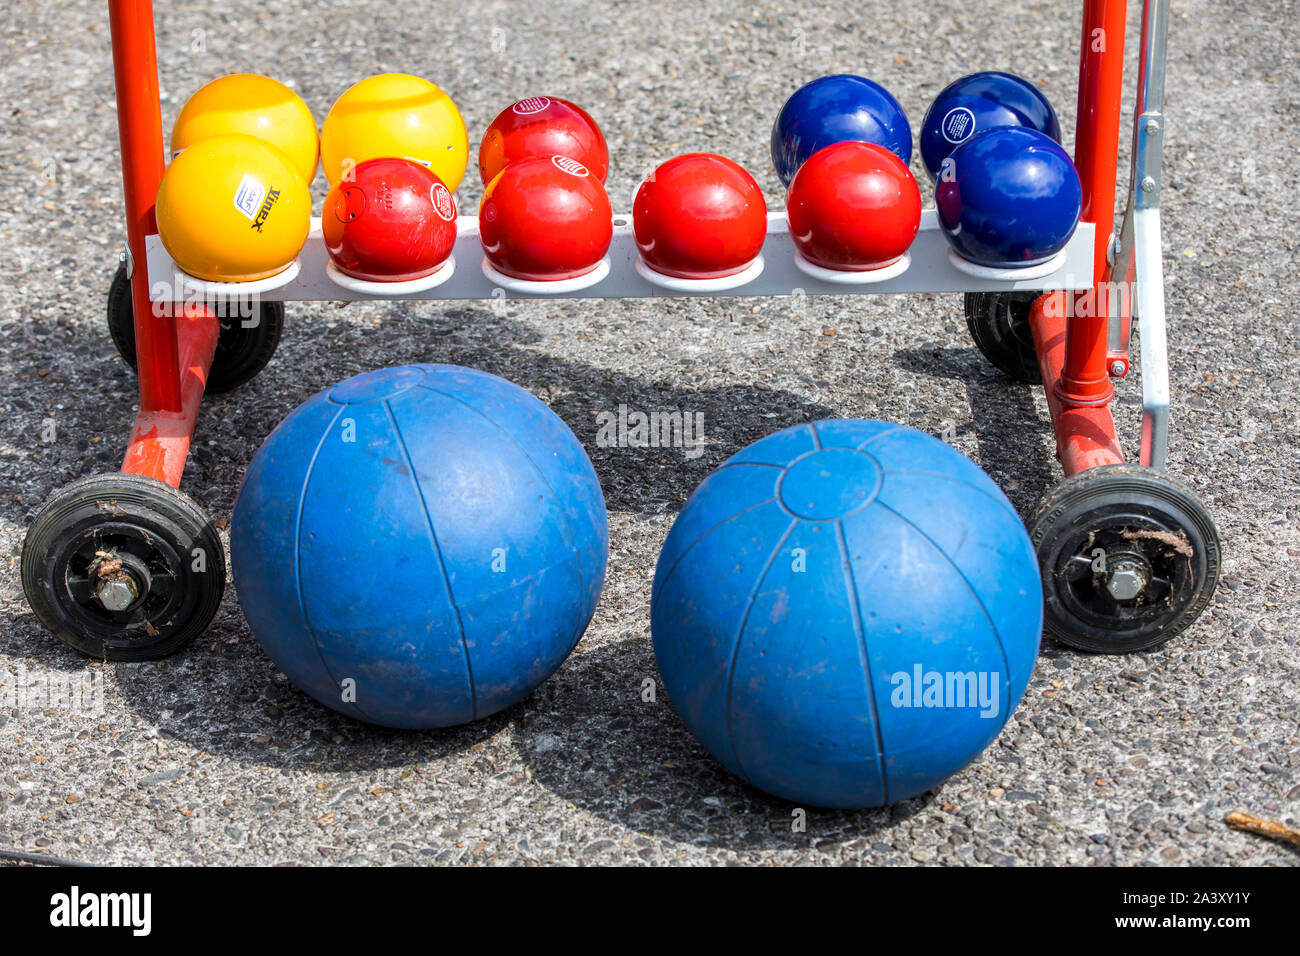 Shooting balls, metal balls, various weights, sizes, colors, on a sports field, athletics, medicine ball long throw, Stock Photo